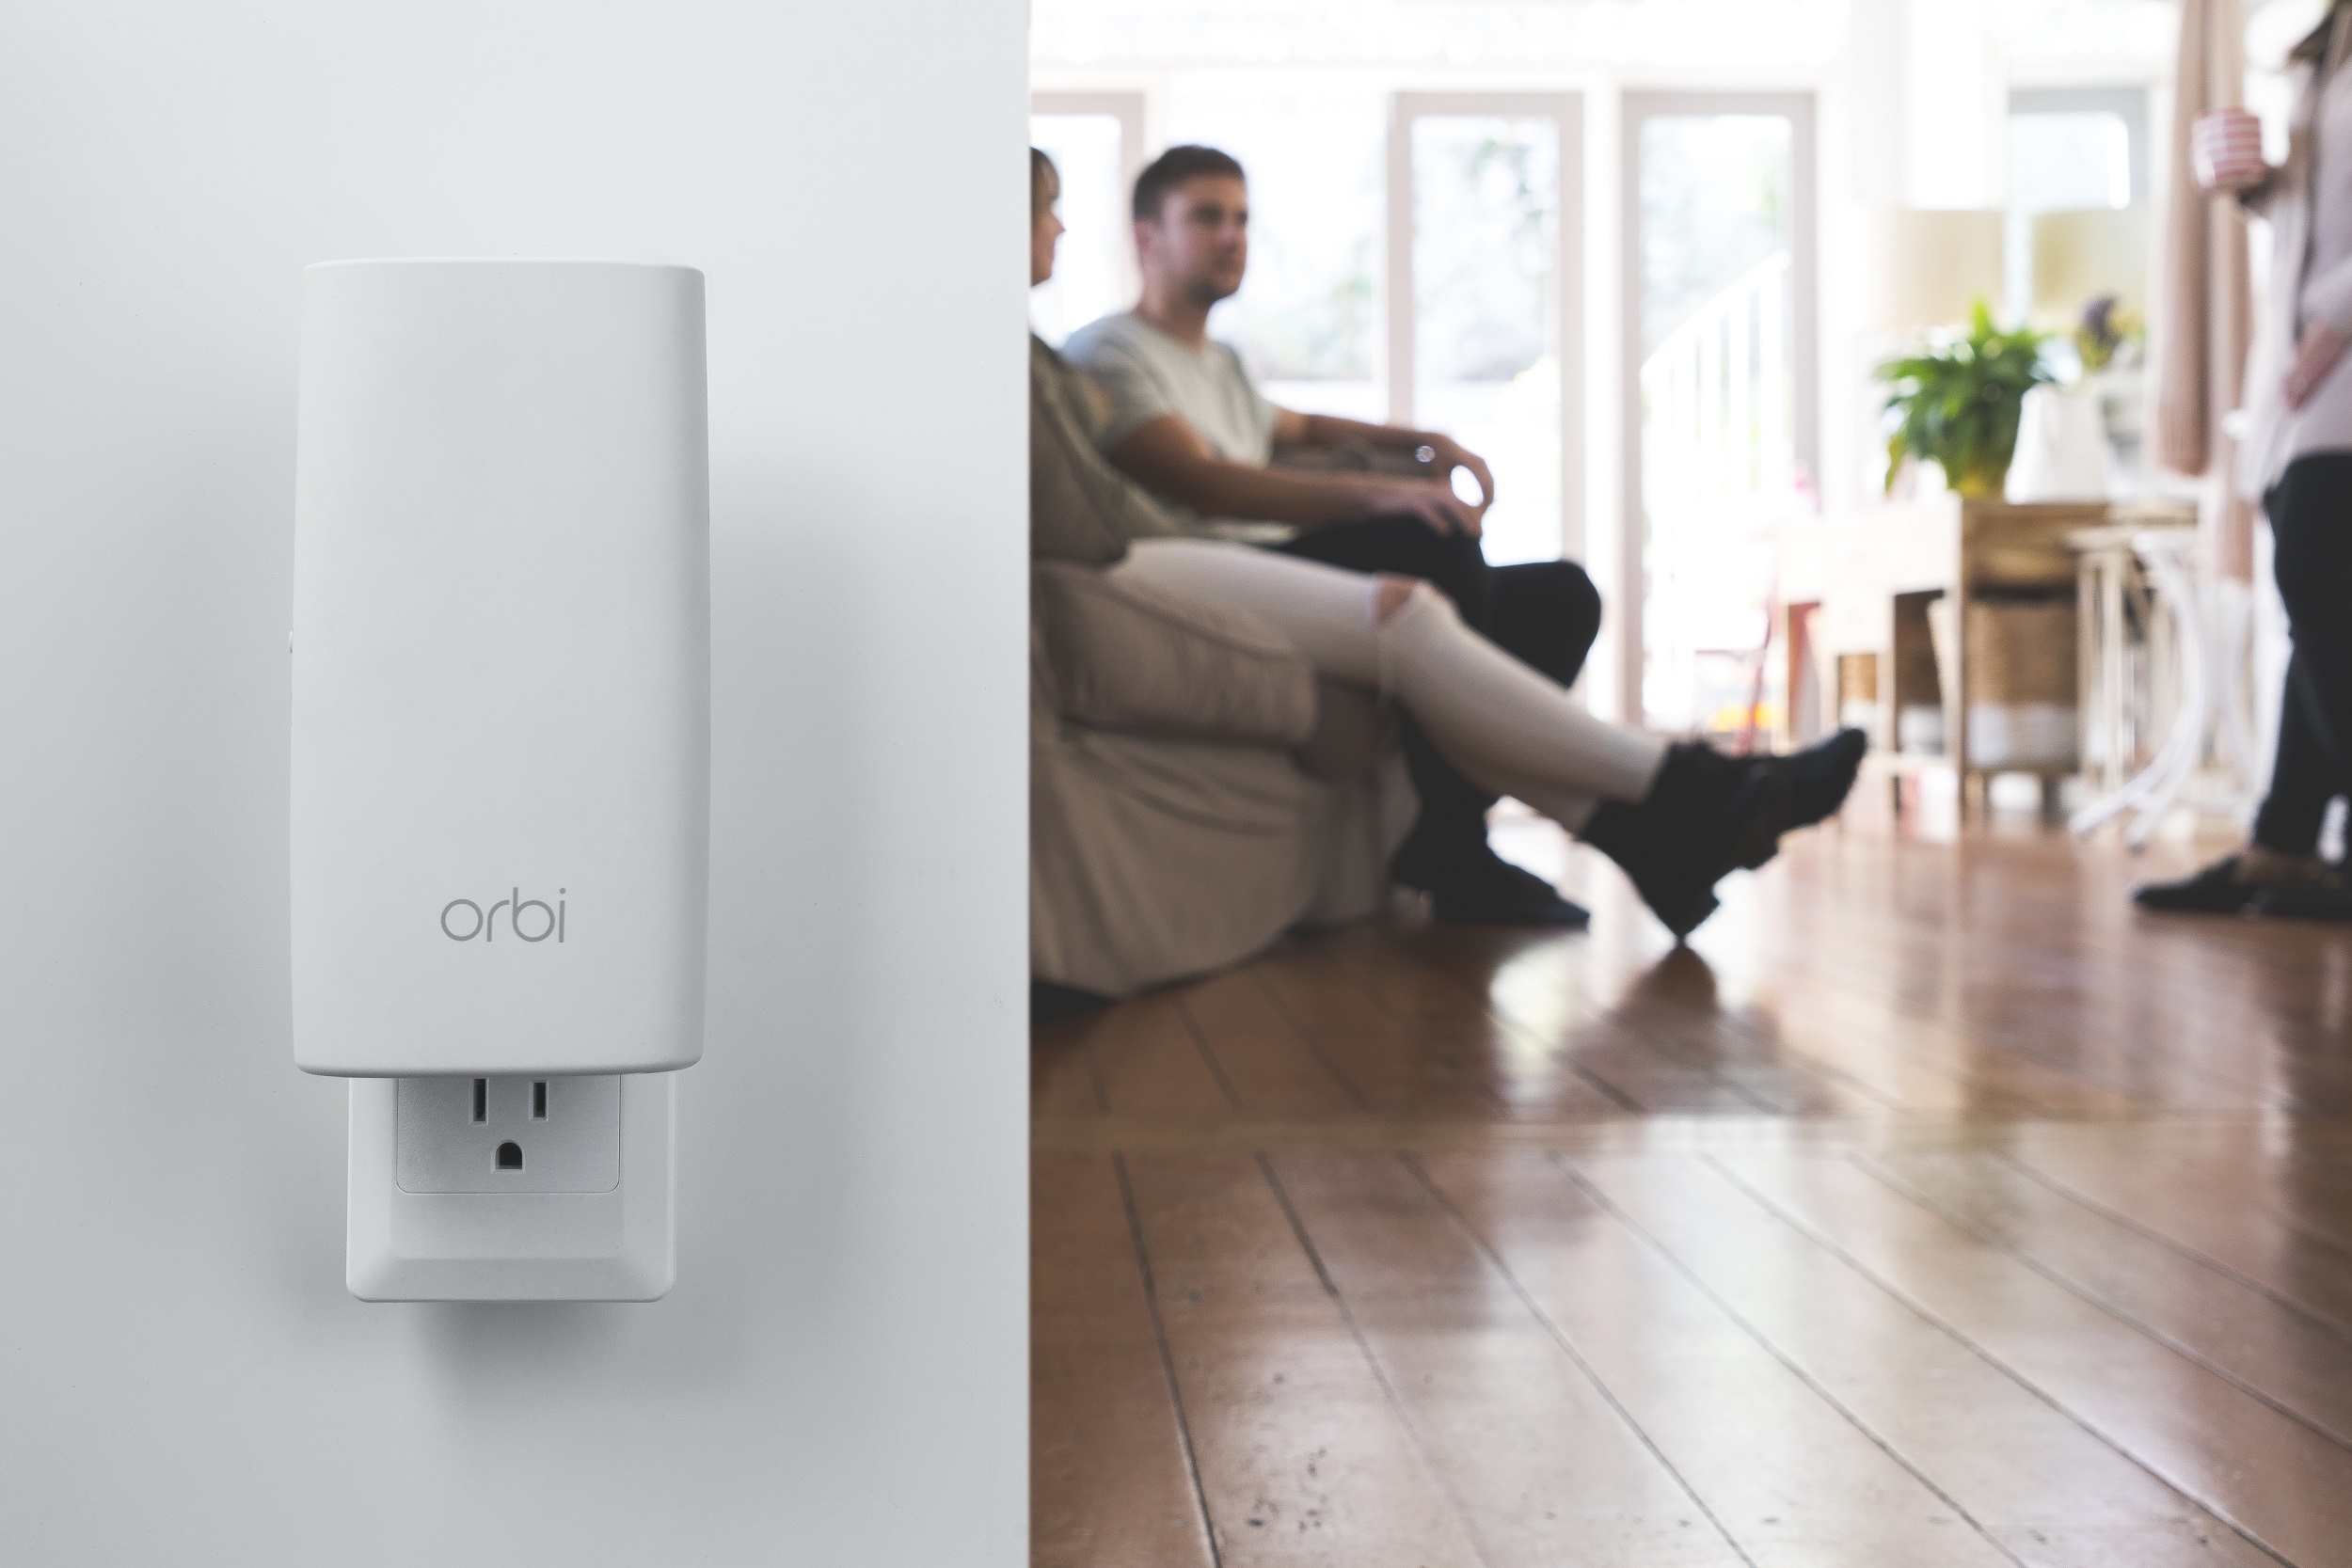 NETGEAR - Orbi RBK20W AC2200 Tri-band WiFi Mesh System with Router and Wall Plug Satellite Extender - image 3 of 5